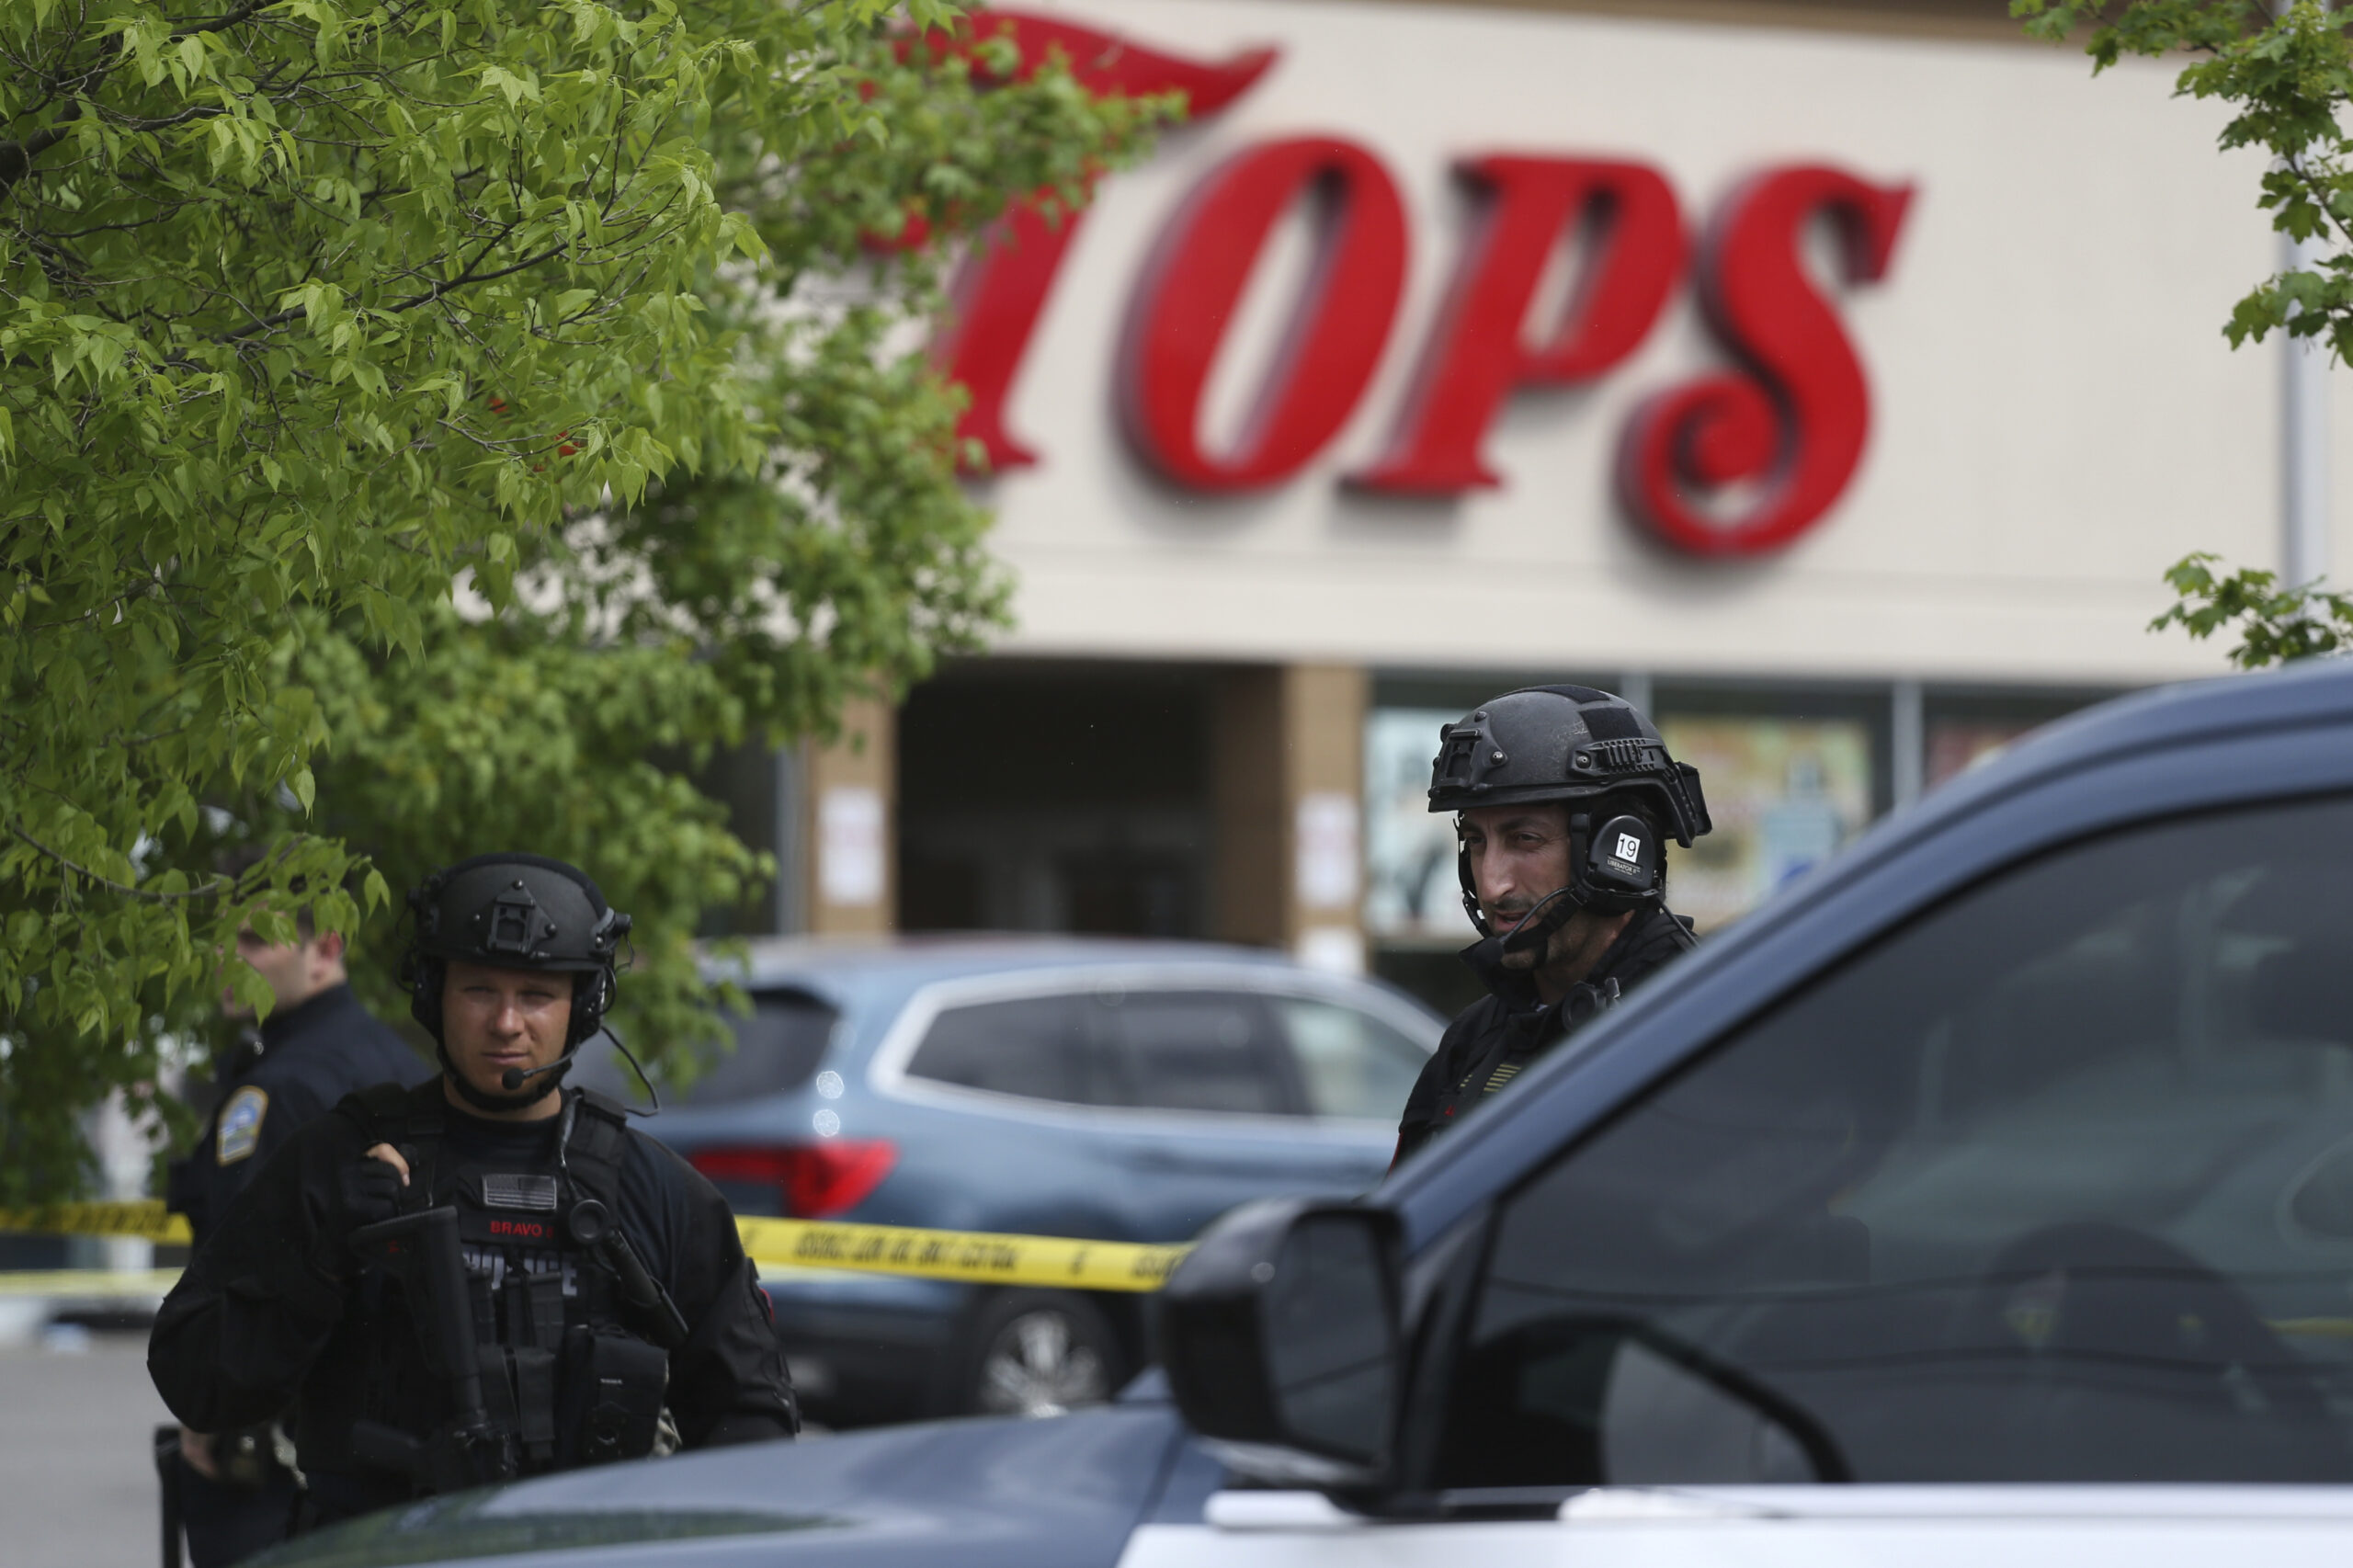 Police secure a perimeter after a shooting at a supermarket, Saturday, May 14, 2022, in Buffalo, N.Y. (AP Photo/Joshua Bessex)